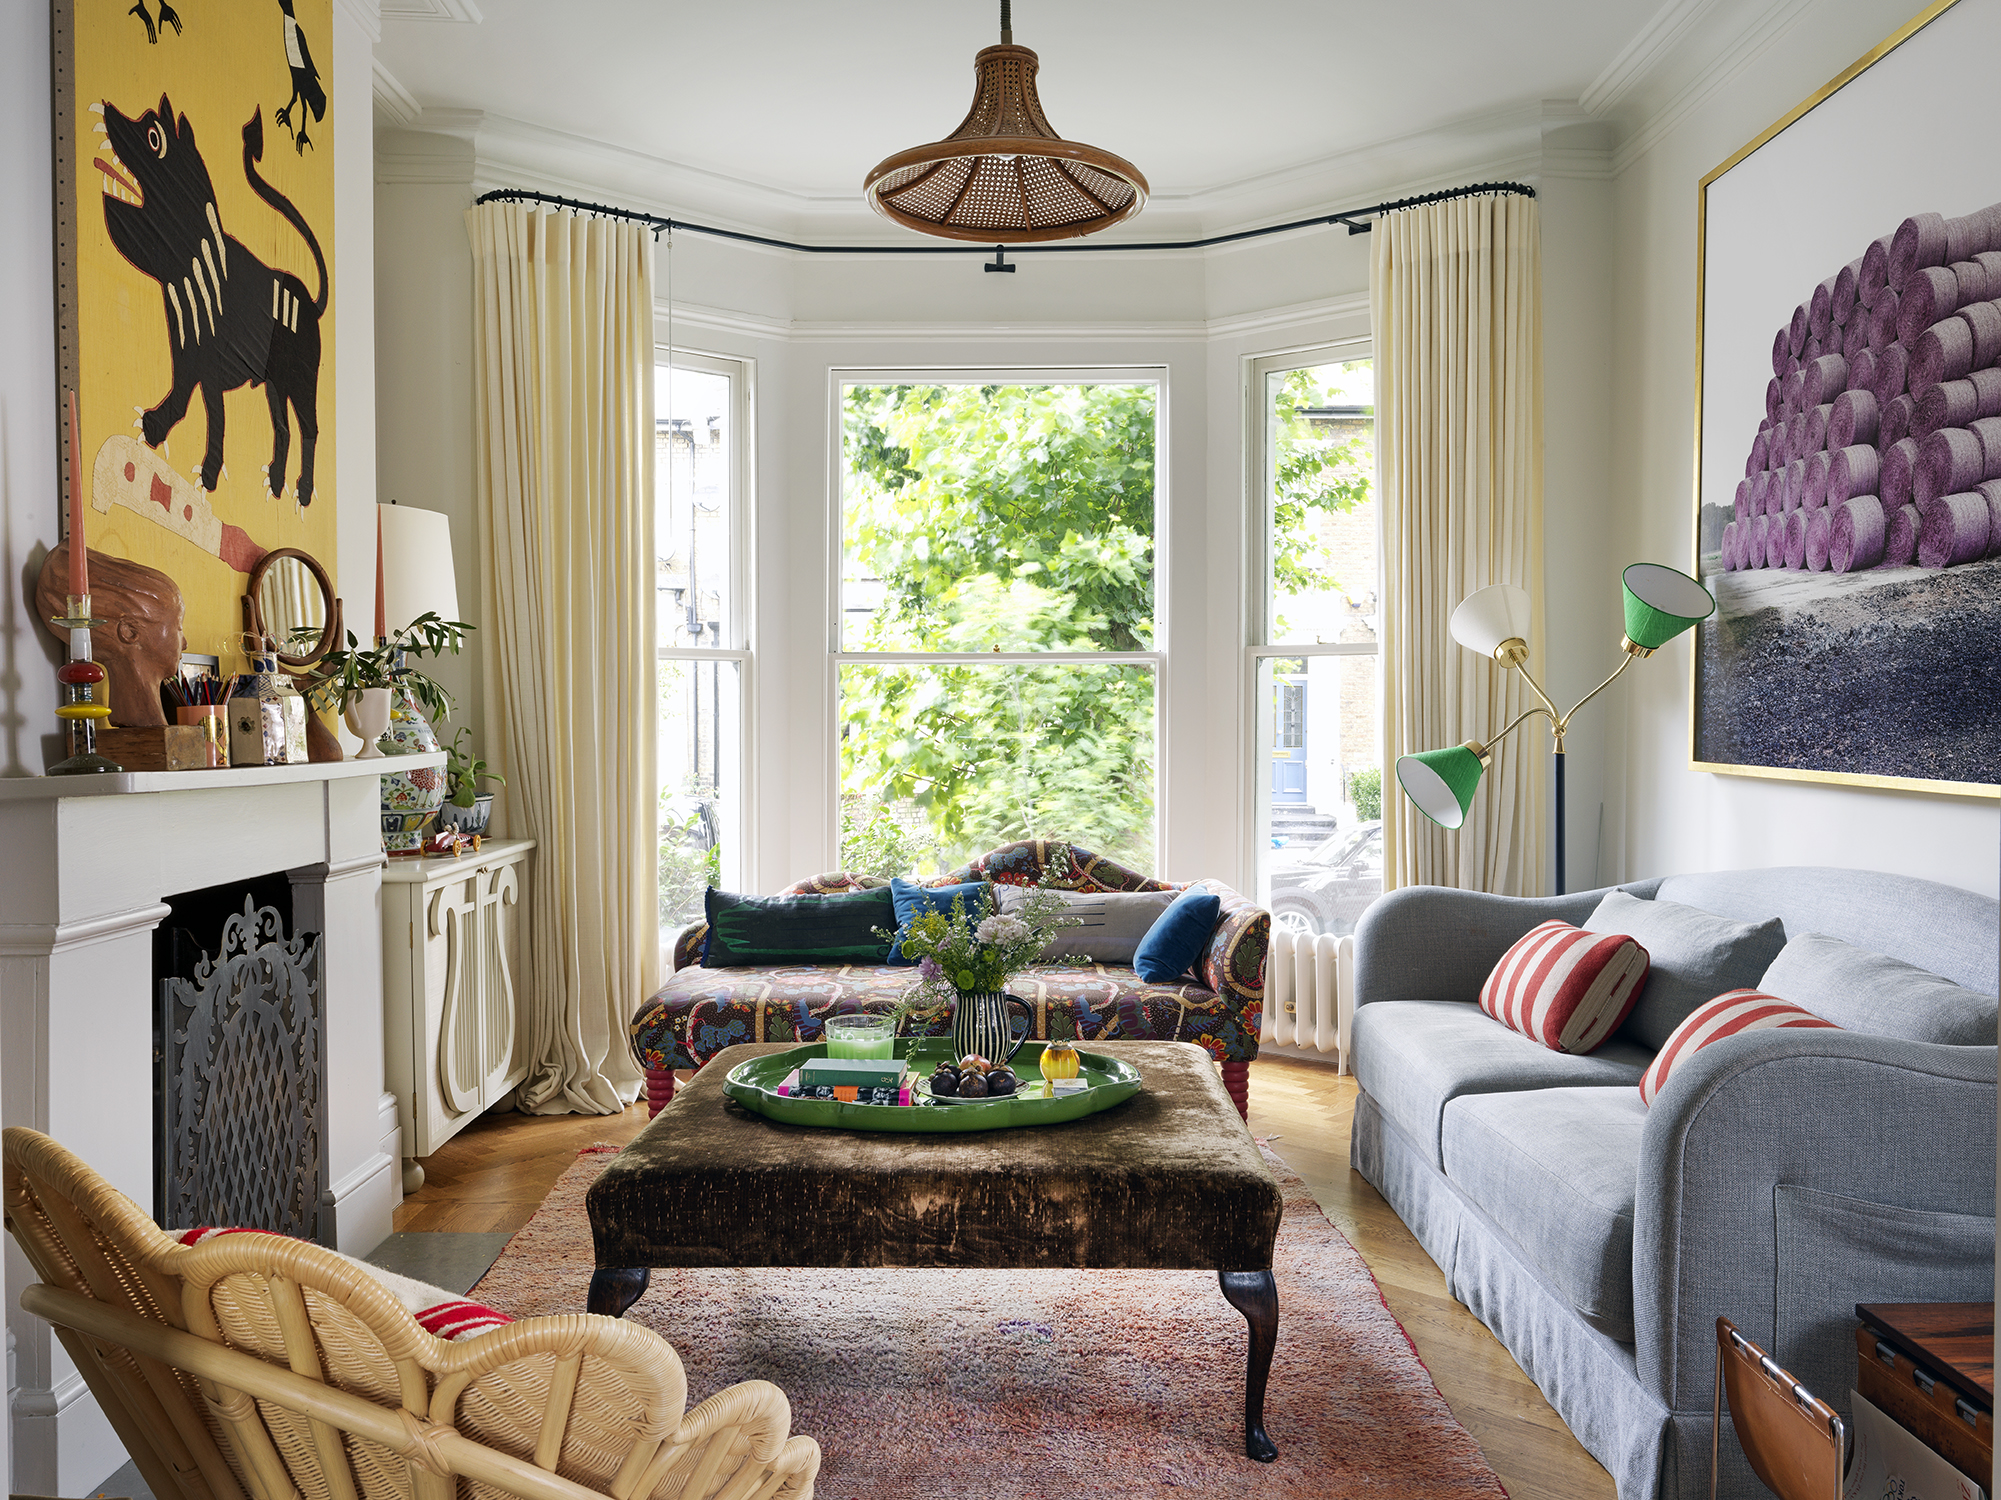 The colorful living room of Beata Heuman's eclectic home